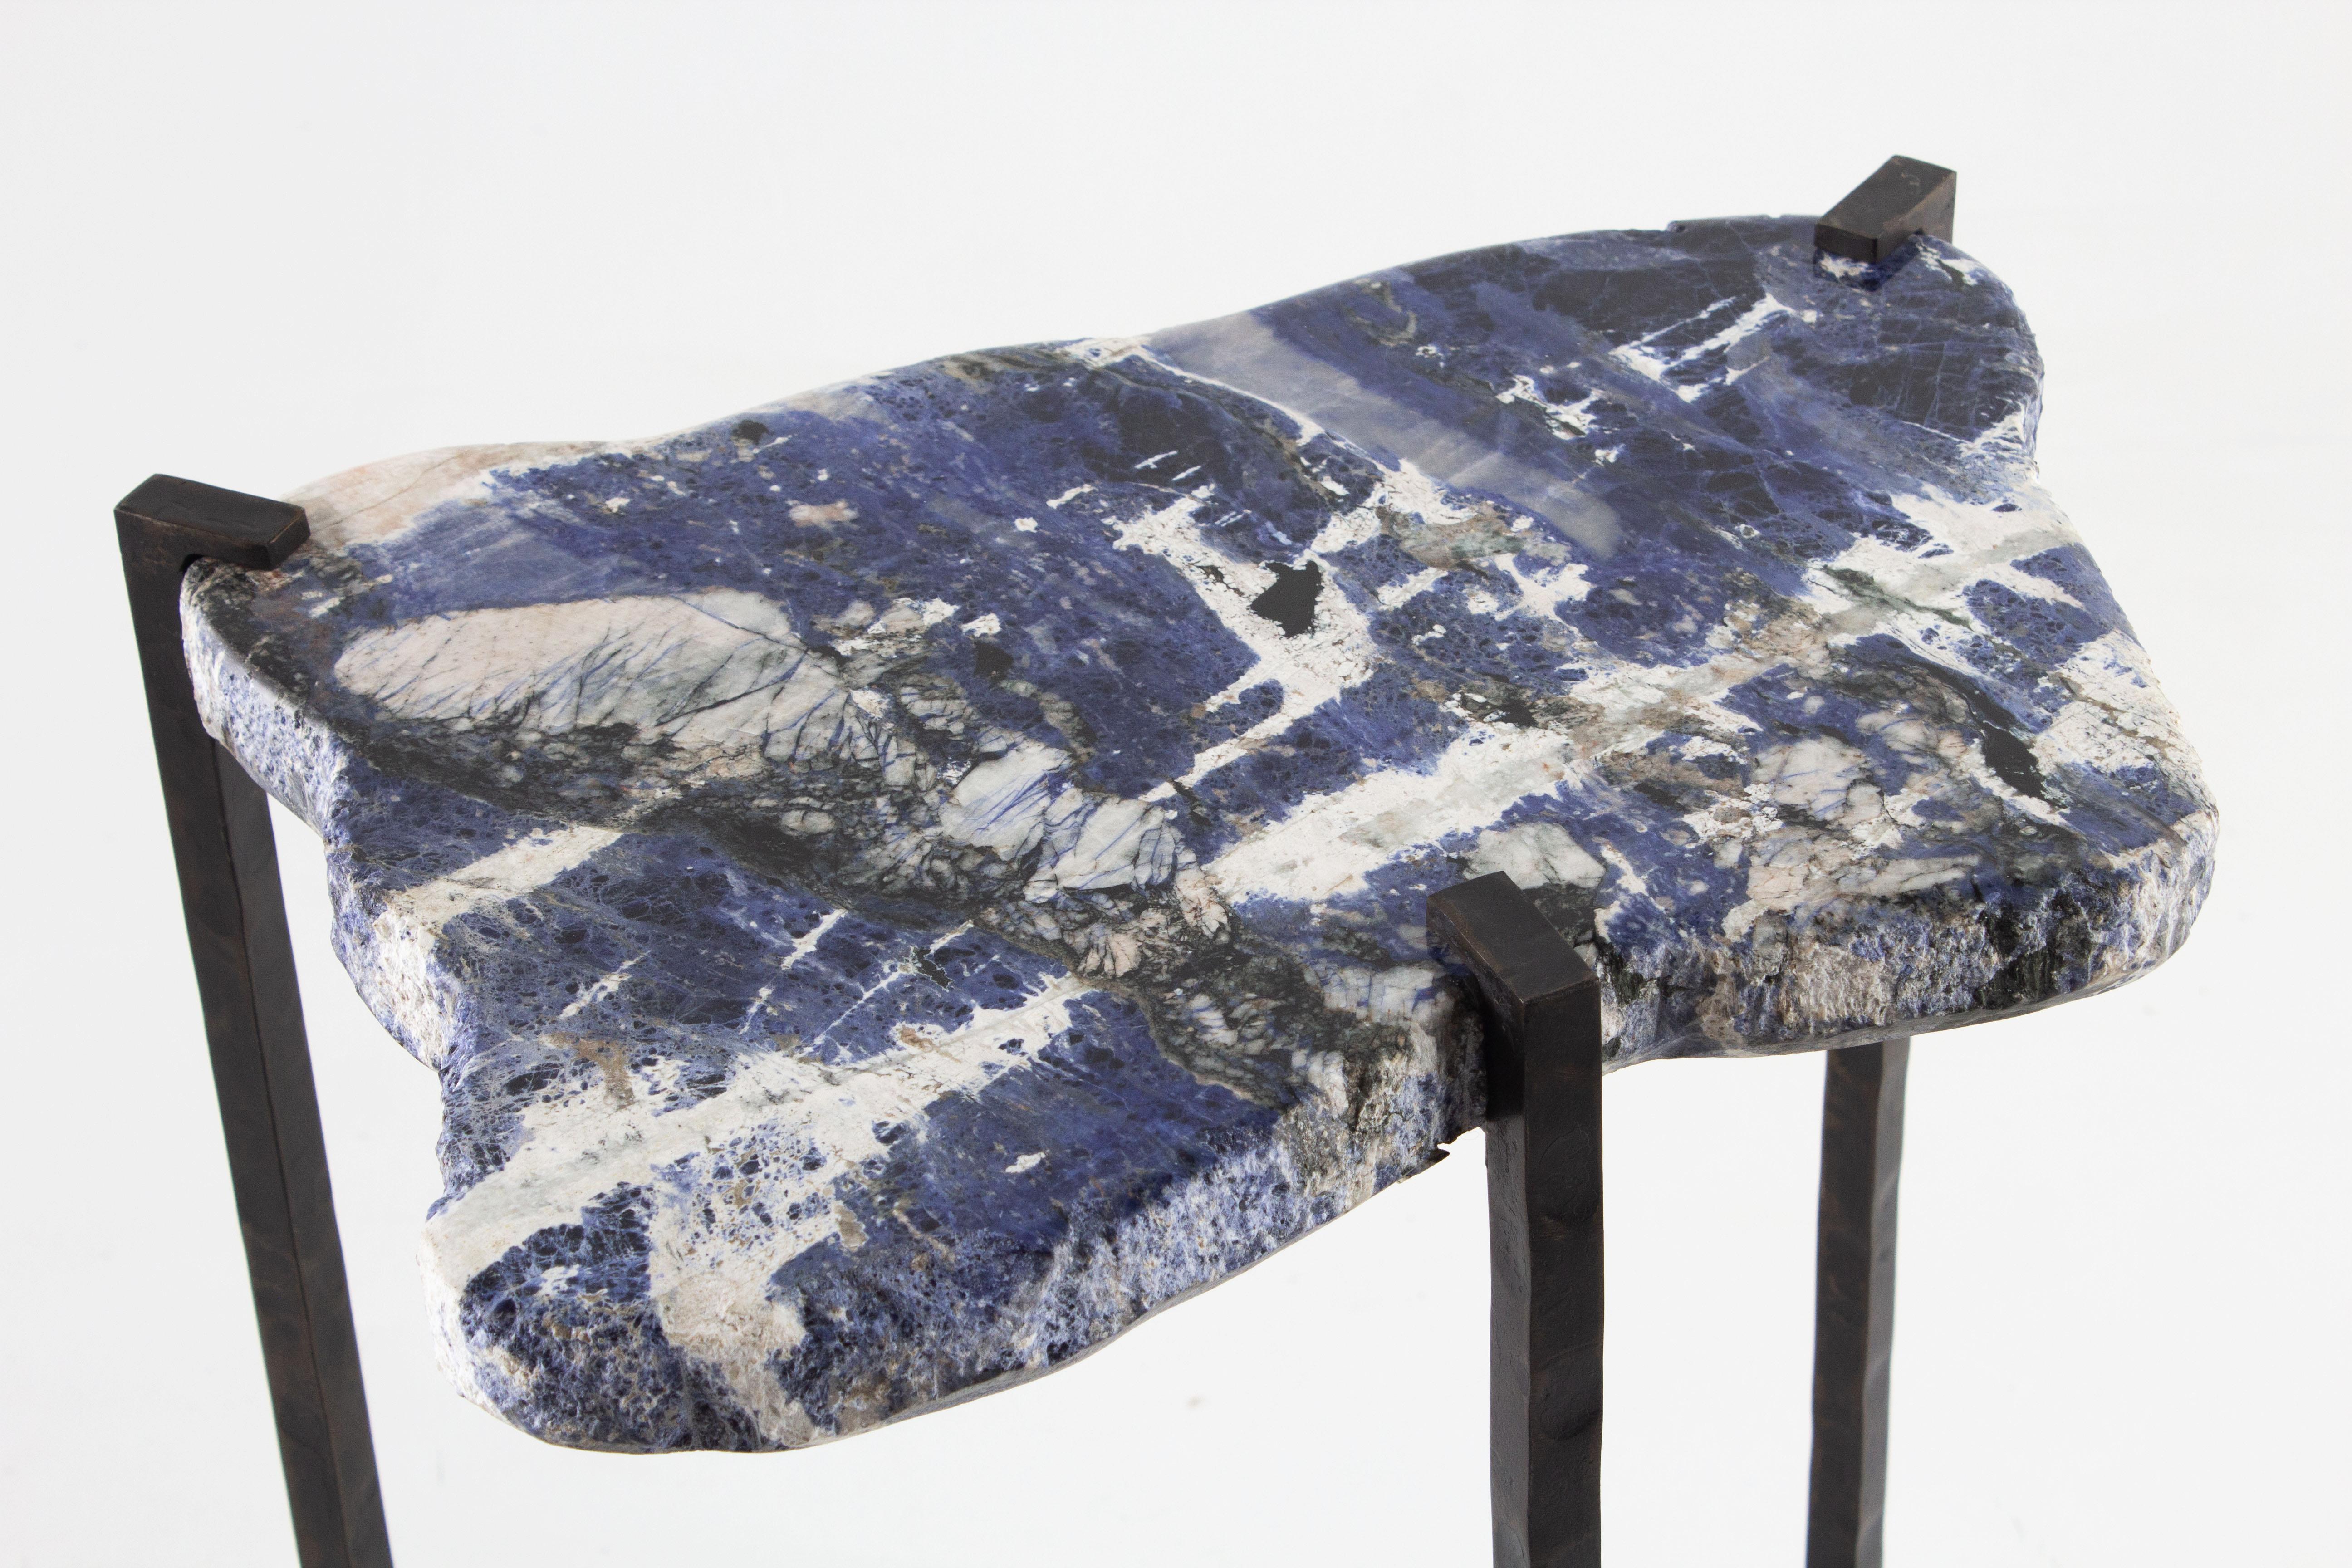 Polished Sodalite slab on hand forged oil rubbed in iron base.